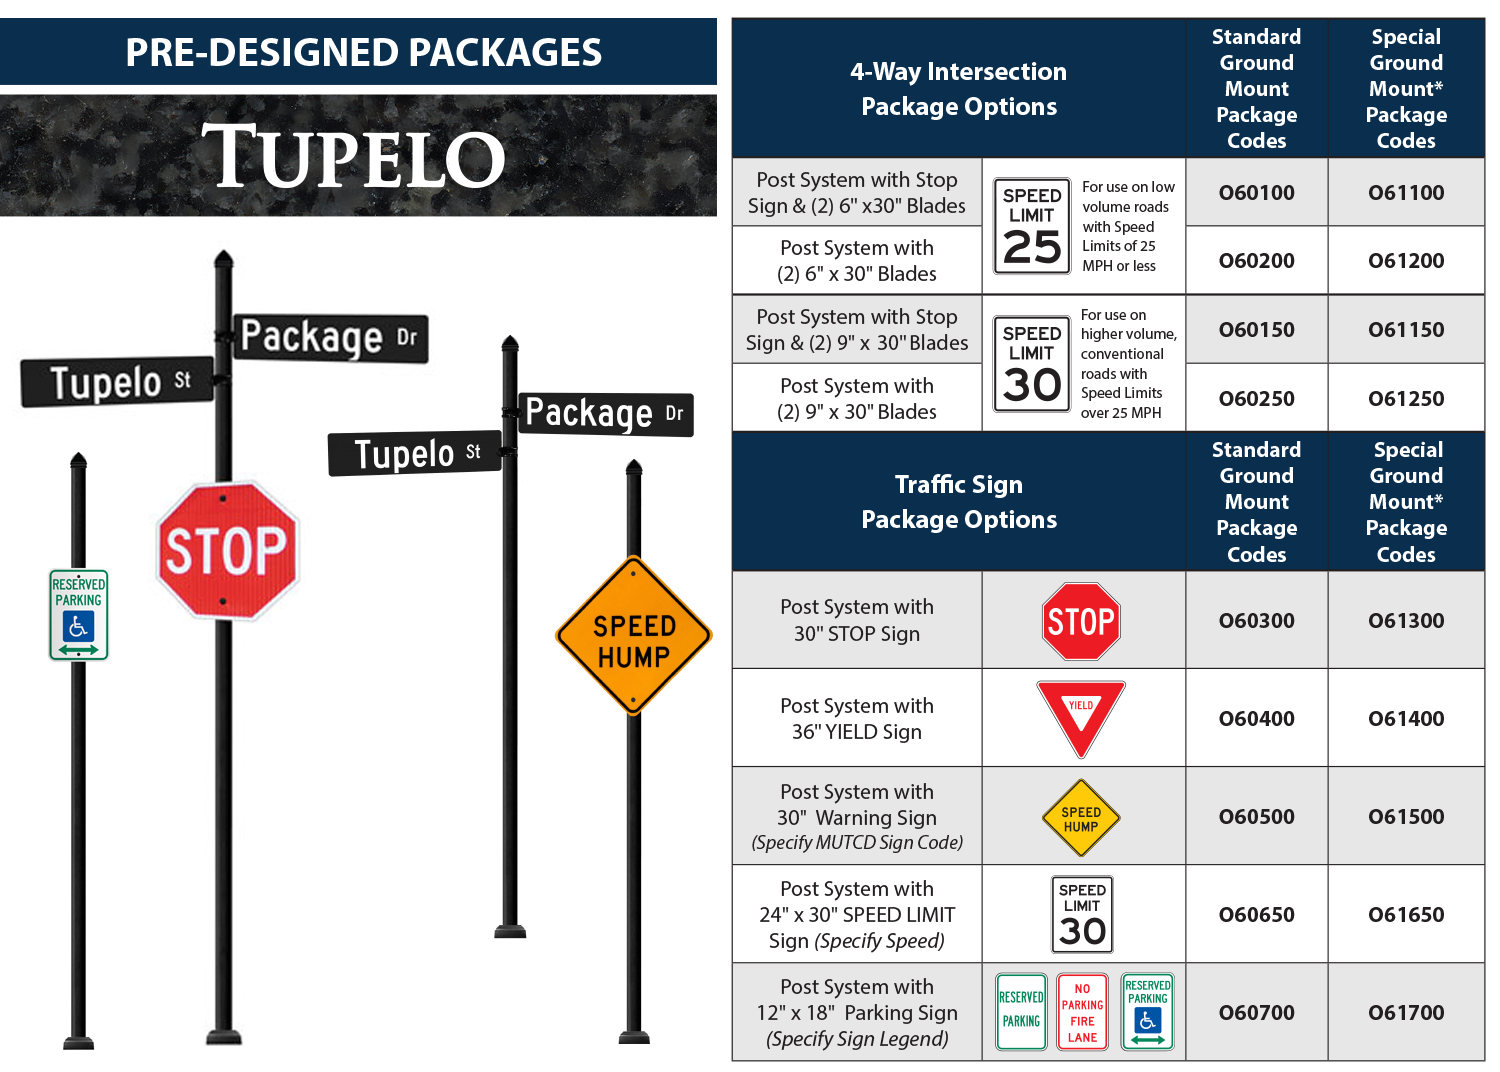 Tupelo Packages Overview